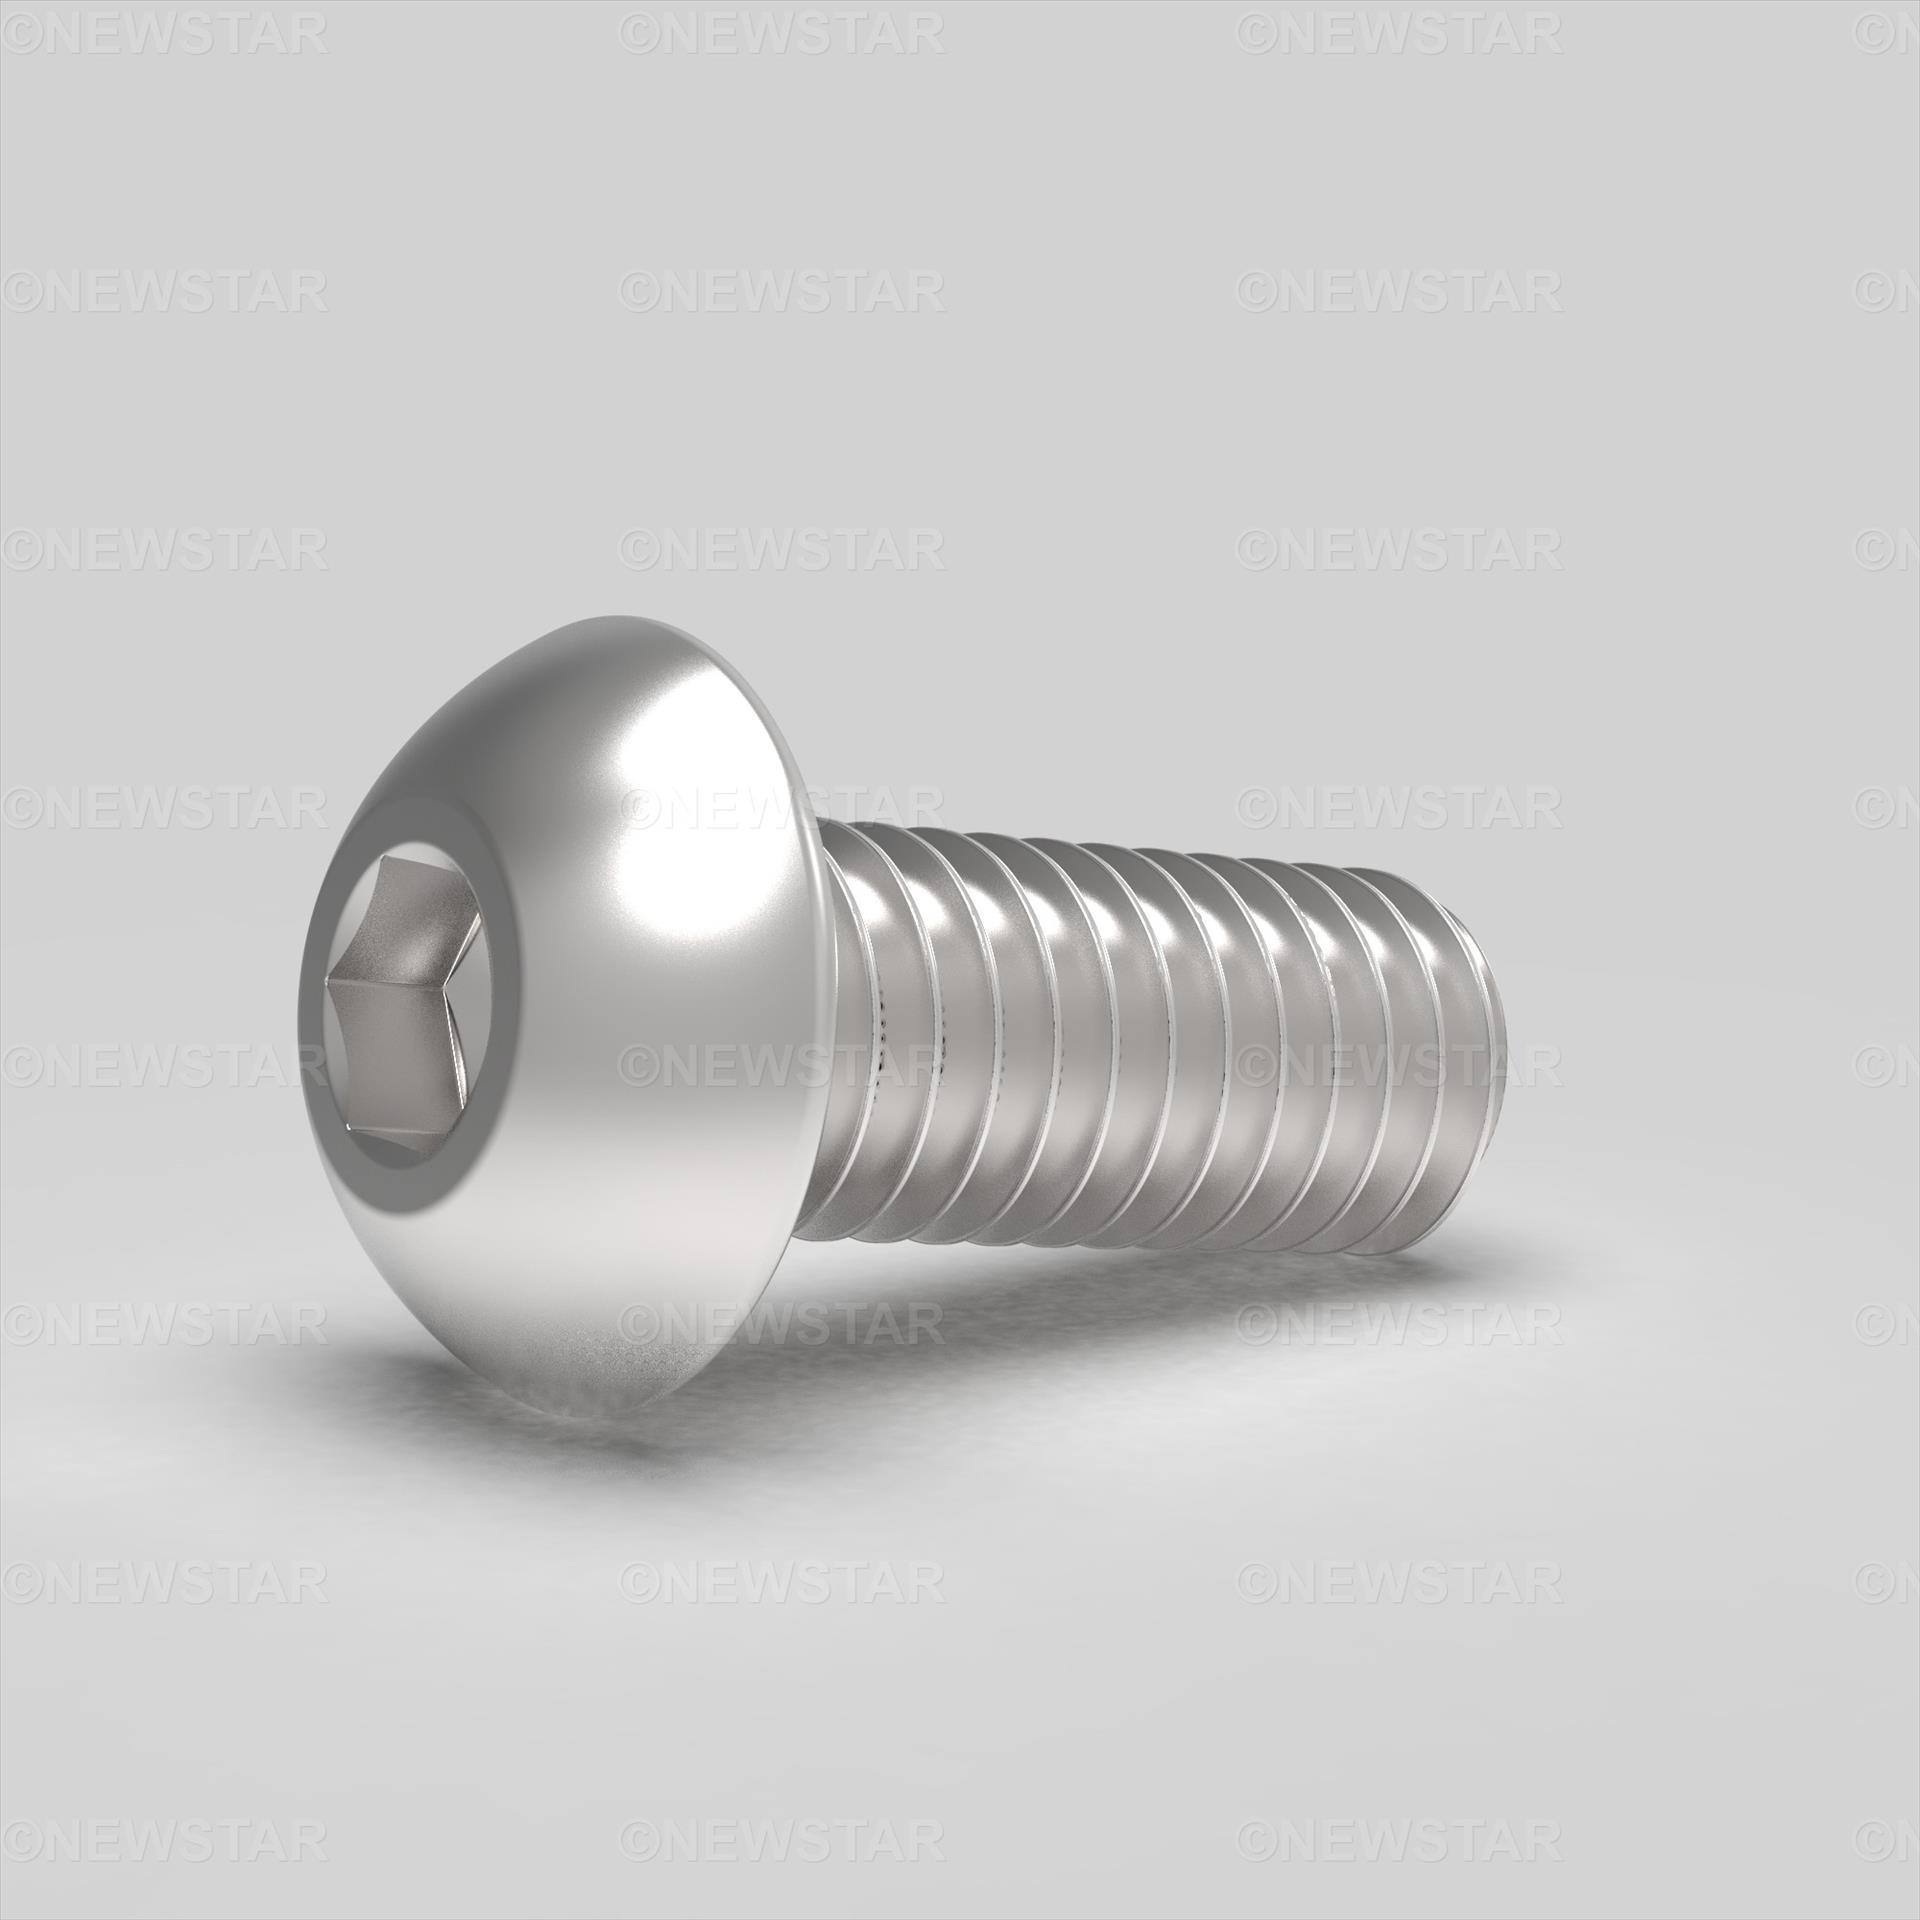 M2.5 X 8 Socket Button ISO 7380-1 A4 Stainless Steel